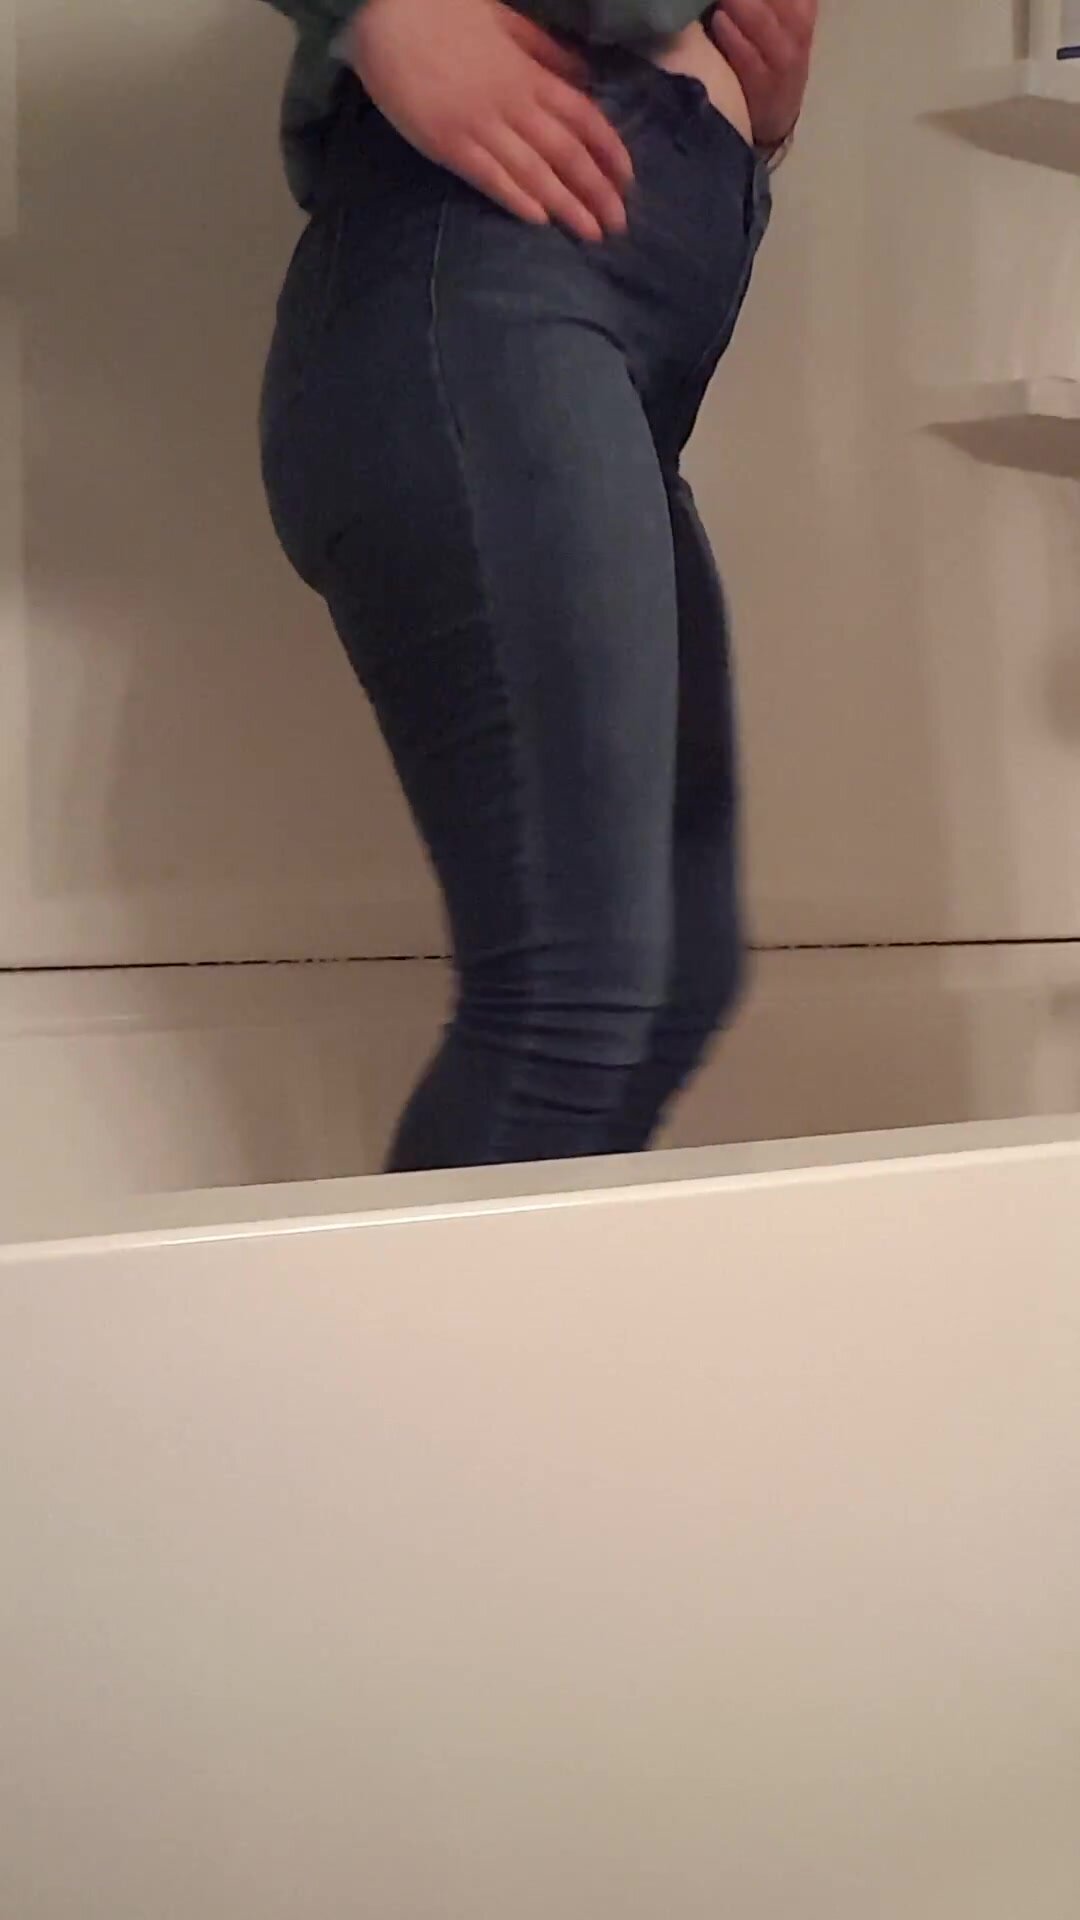 Jeans Piss - video 11